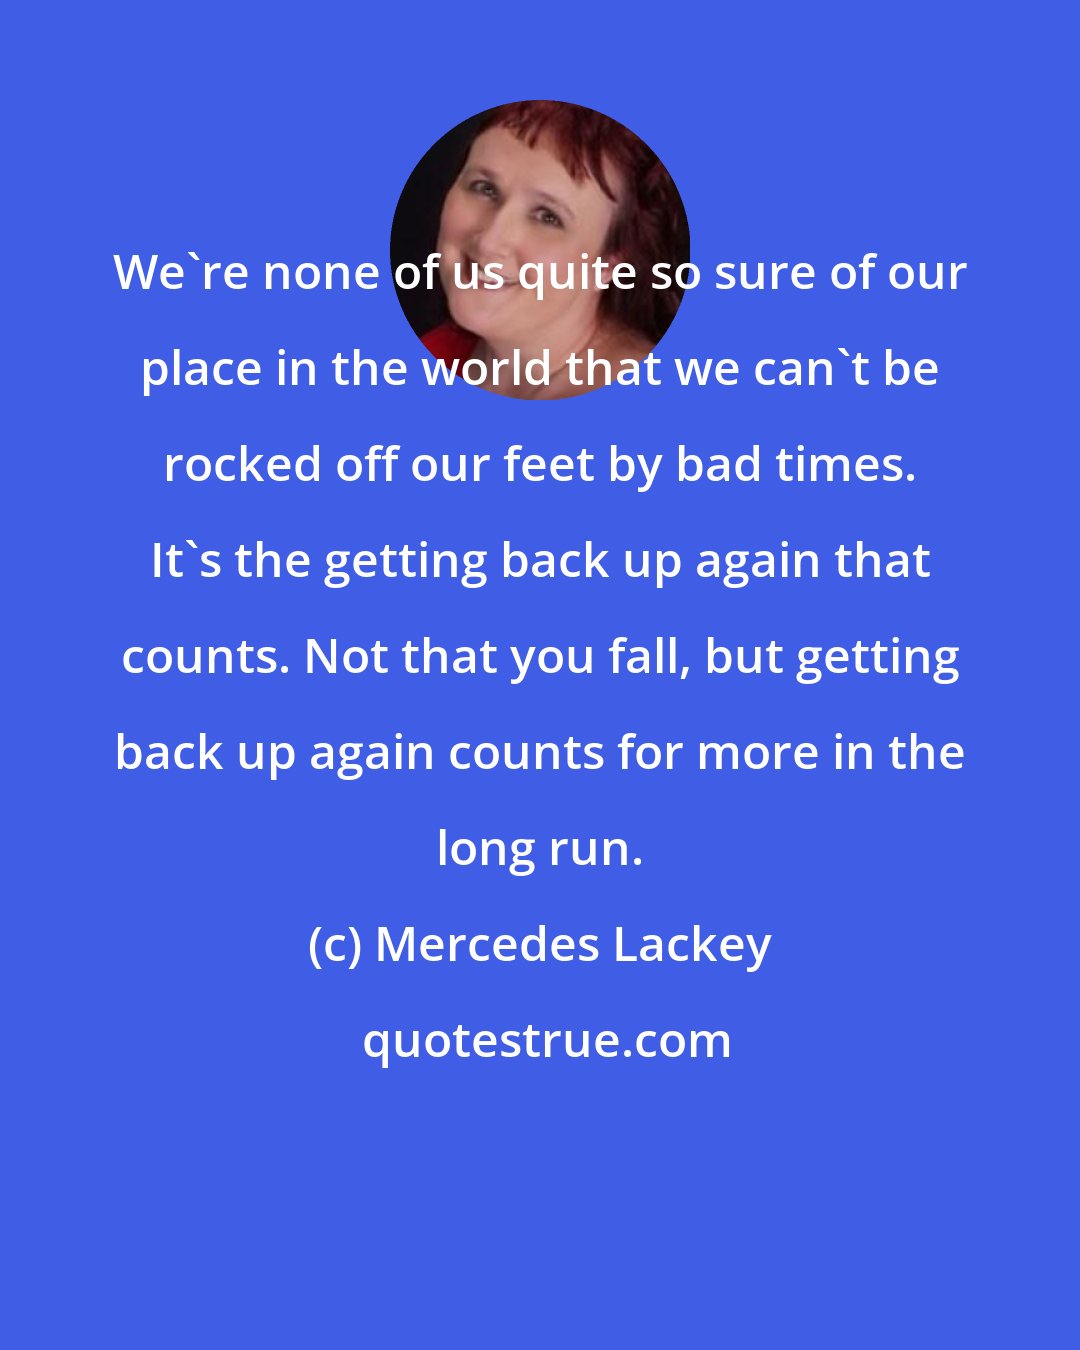 Mercedes Lackey: We're none of us quite so sure of our place in the world that we can't be rocked off our feet by bad times. It's the getting back up again that counts. Not that you fall, but getting back up again counts for more in the long run.